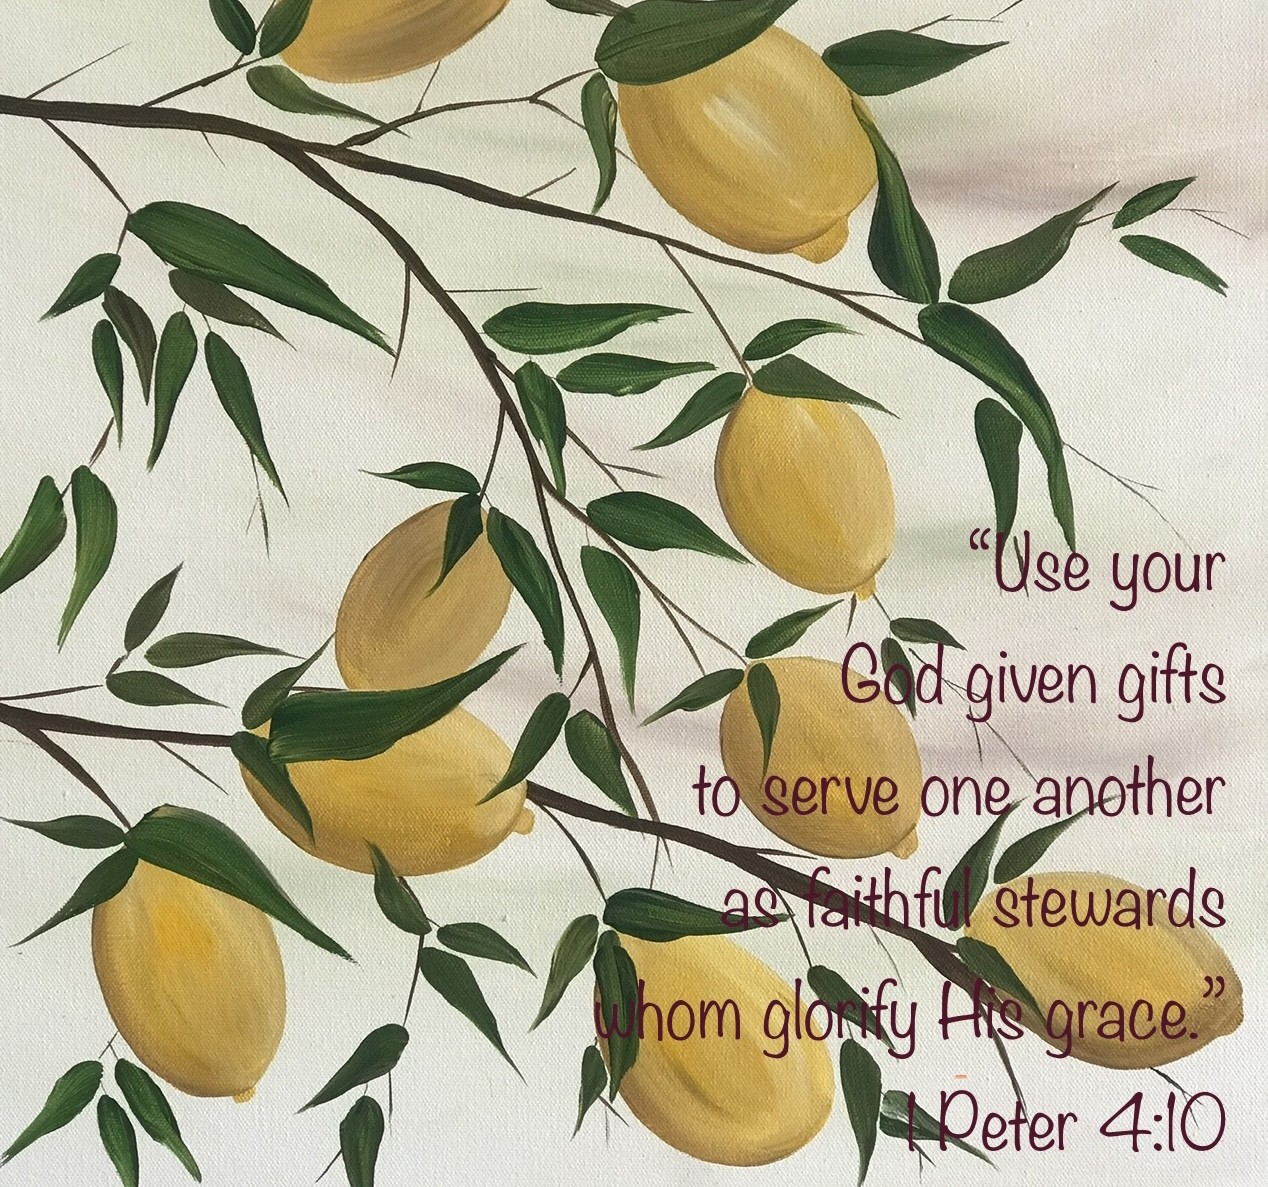 1Peter 4:10 "Use your God given gifts to serve one another as faithful stewards whom glorify His grace."